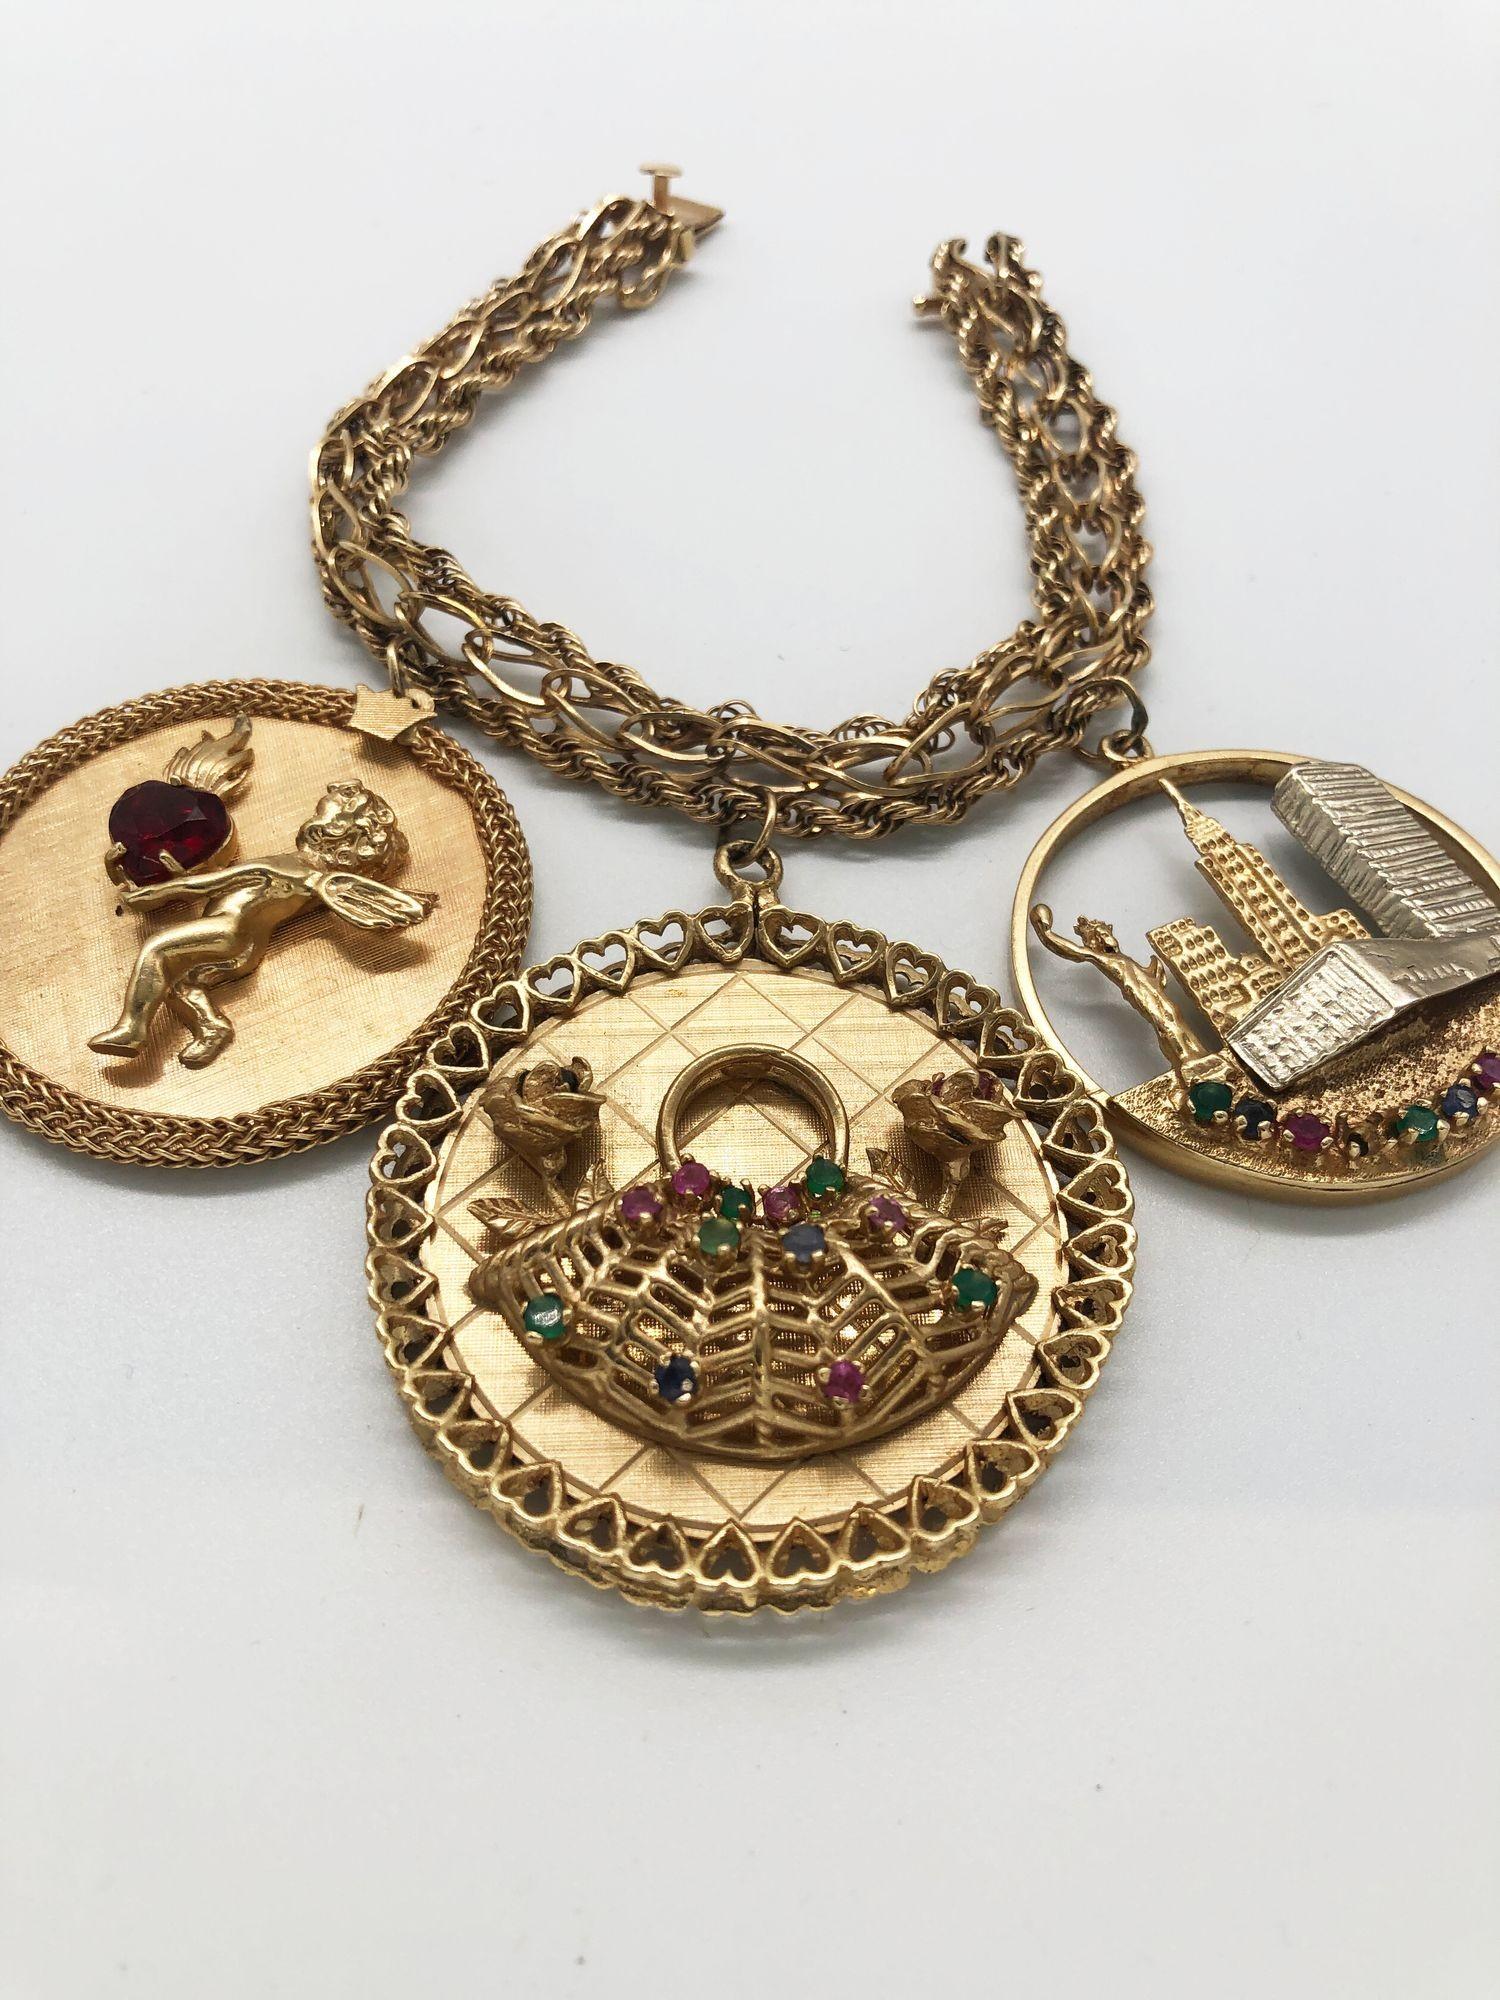 Charming mid-century ladies' charm bracelet featuring 3 charms with room to add more. All 3 have 14K gold markings on them as well as the substantial gold chain. Charms feature a cherub holding a burning jewel heart, a basket of roses, and a New